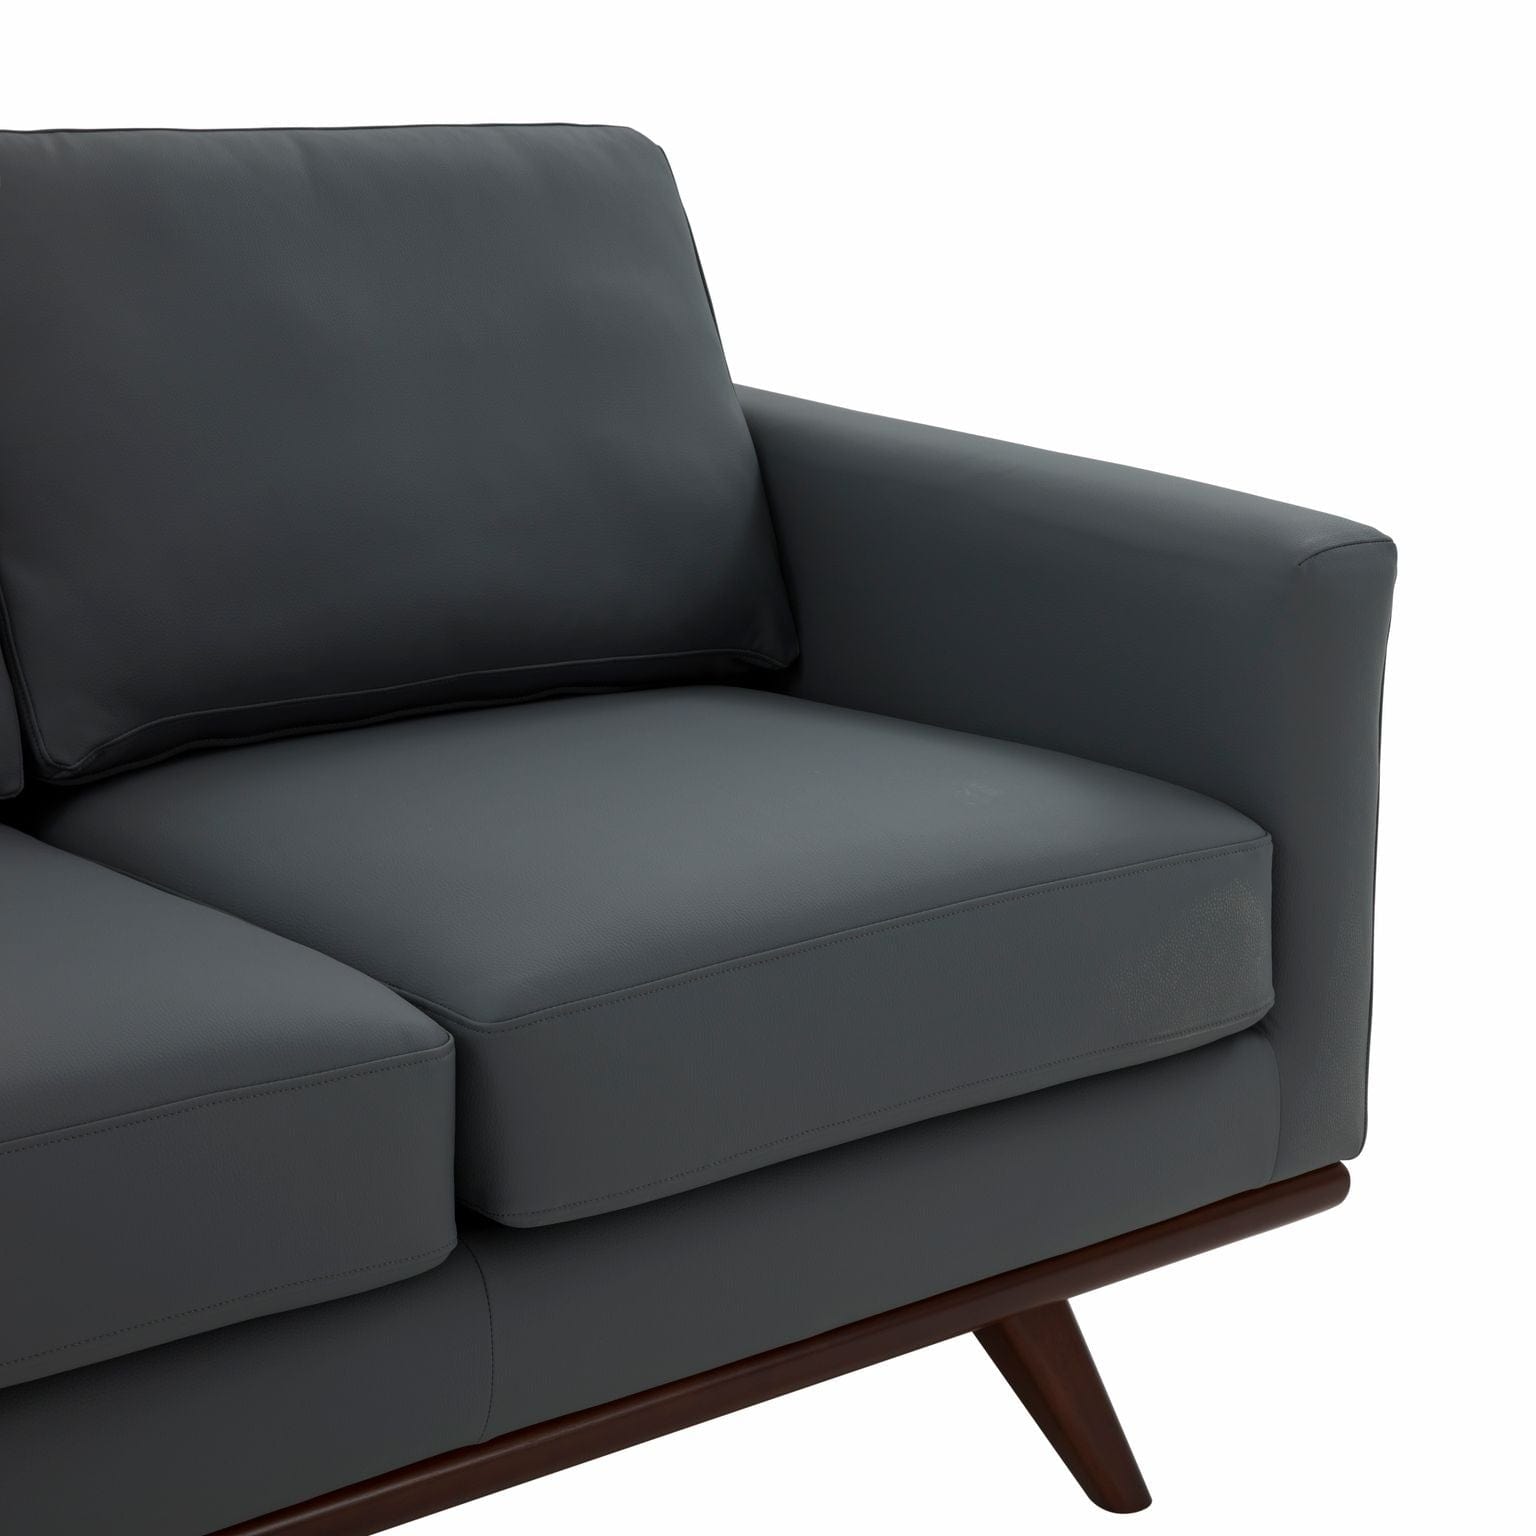 LeisureMod Chester Leather Loveseat - Grey